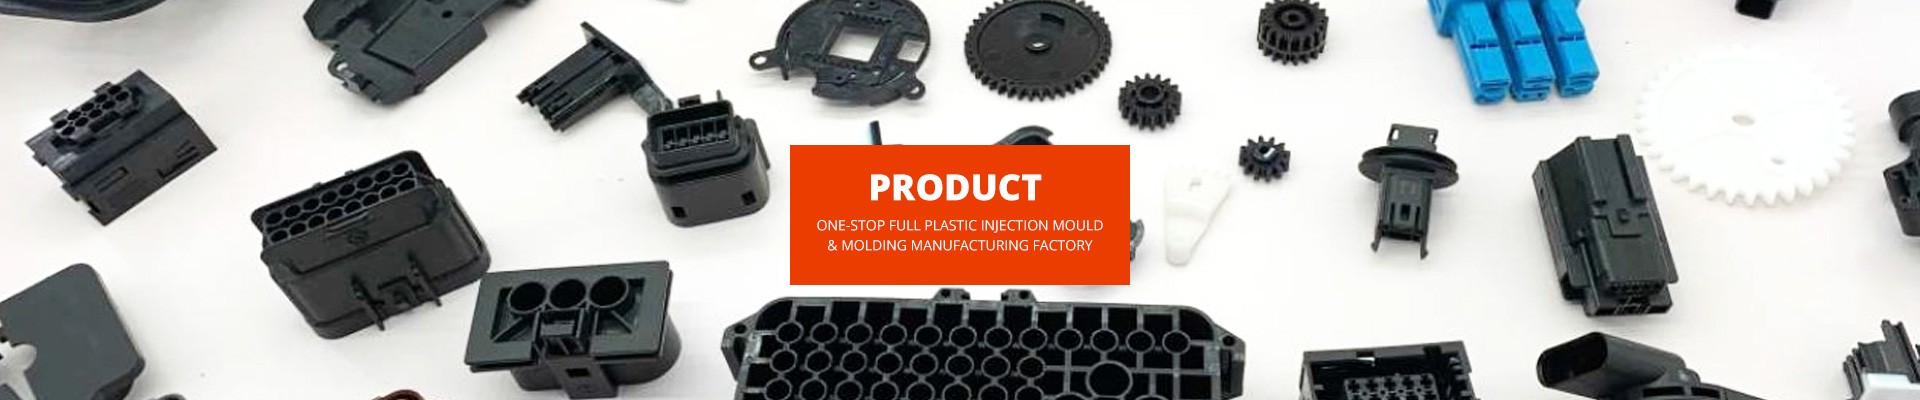 Plastic Injection Molds & Molding